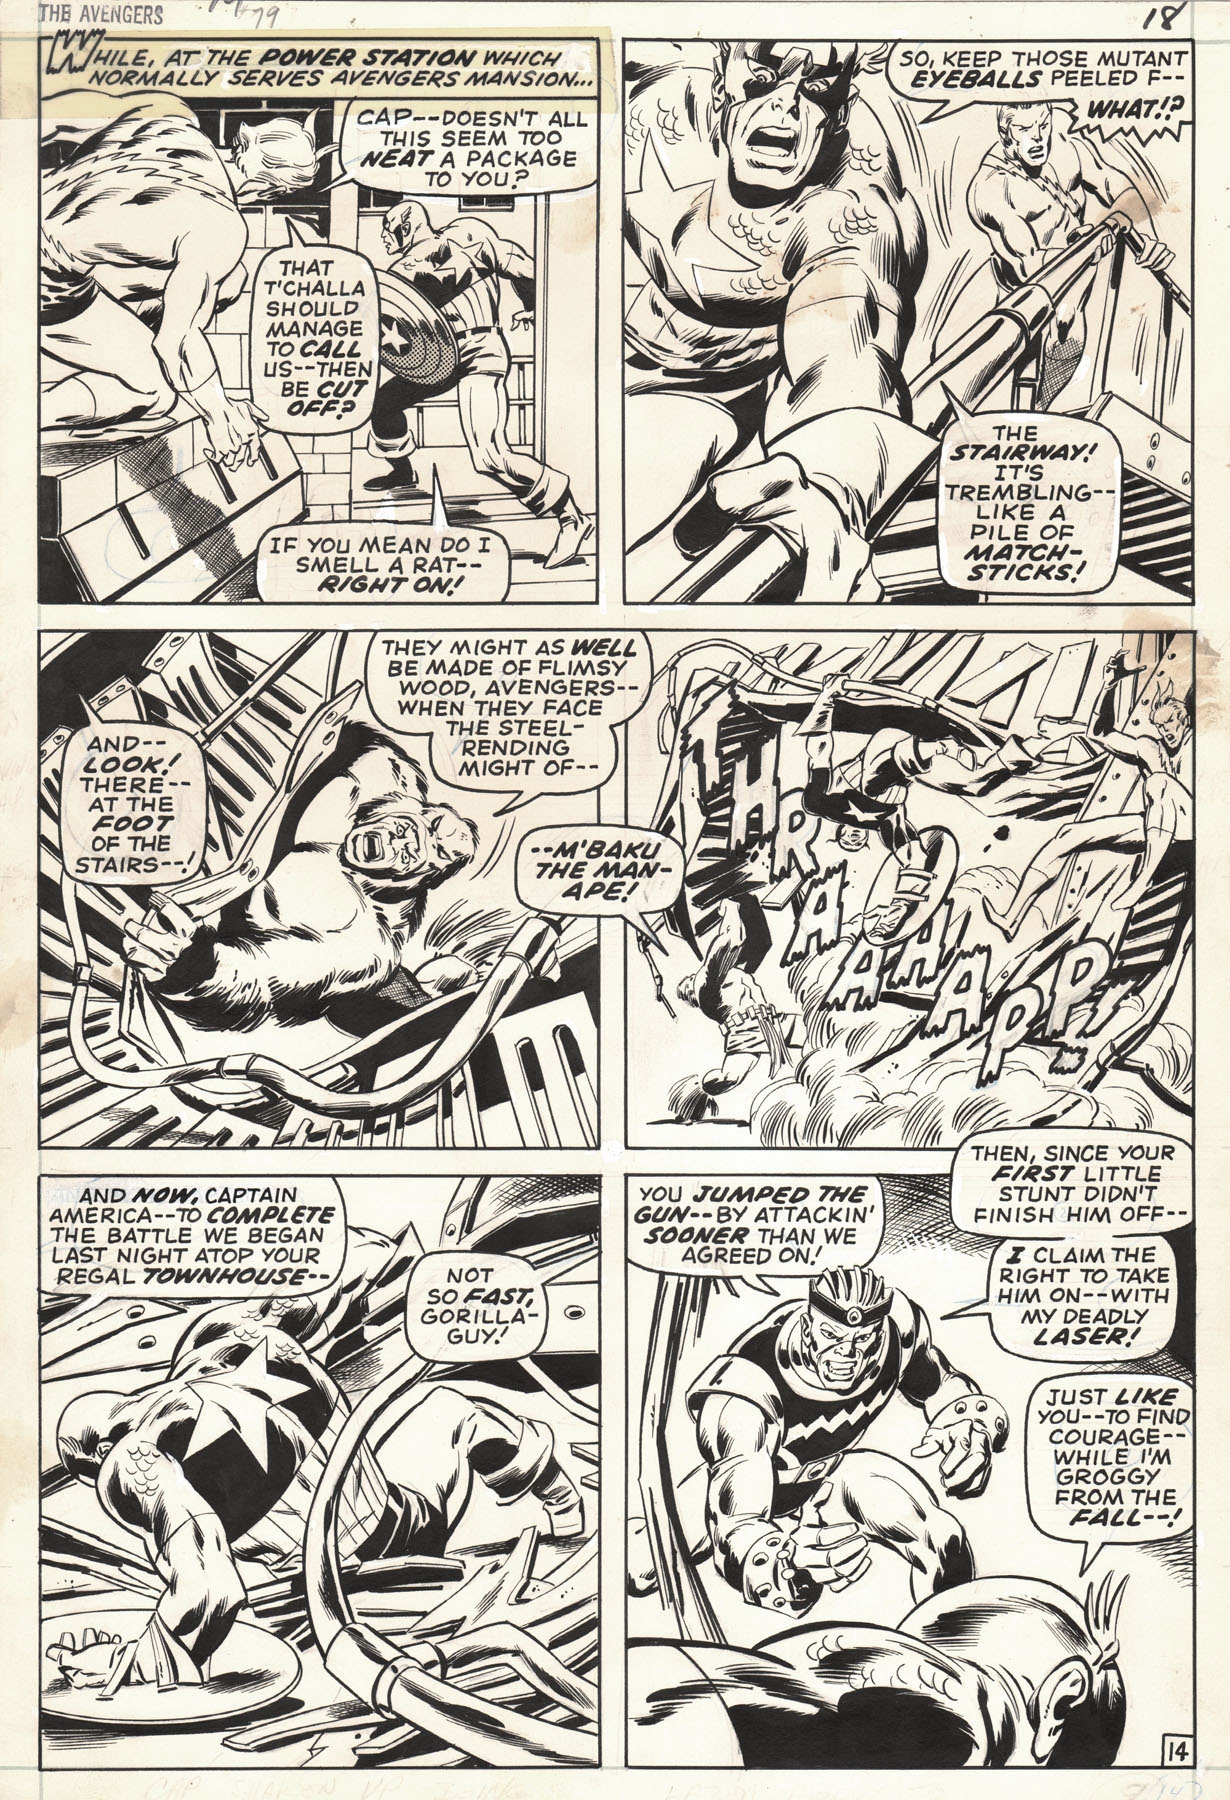 JOHN BUSCEMA AVENGERS #79 PAGE 14 (1970, CAPTAIN AMERICA AND